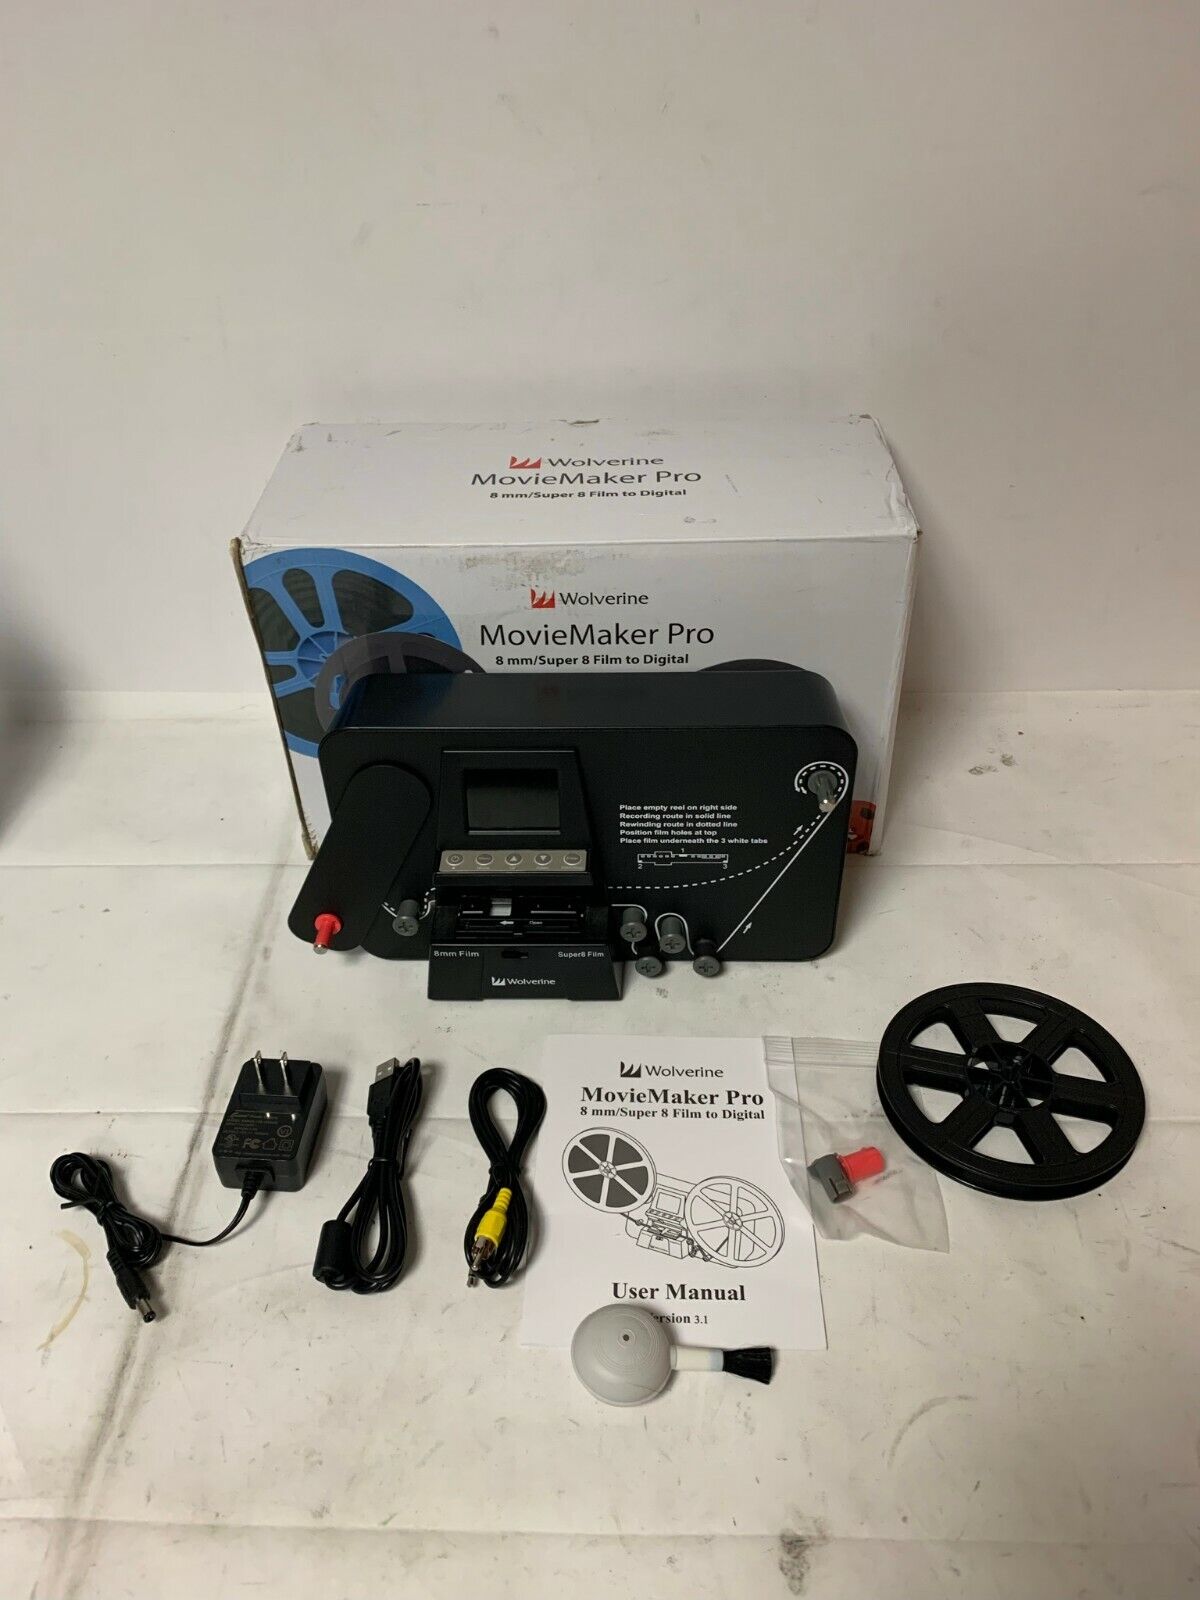 Wolverine Data MovieMaker PRO 8mm and Super 8 Converter - Up to 9\